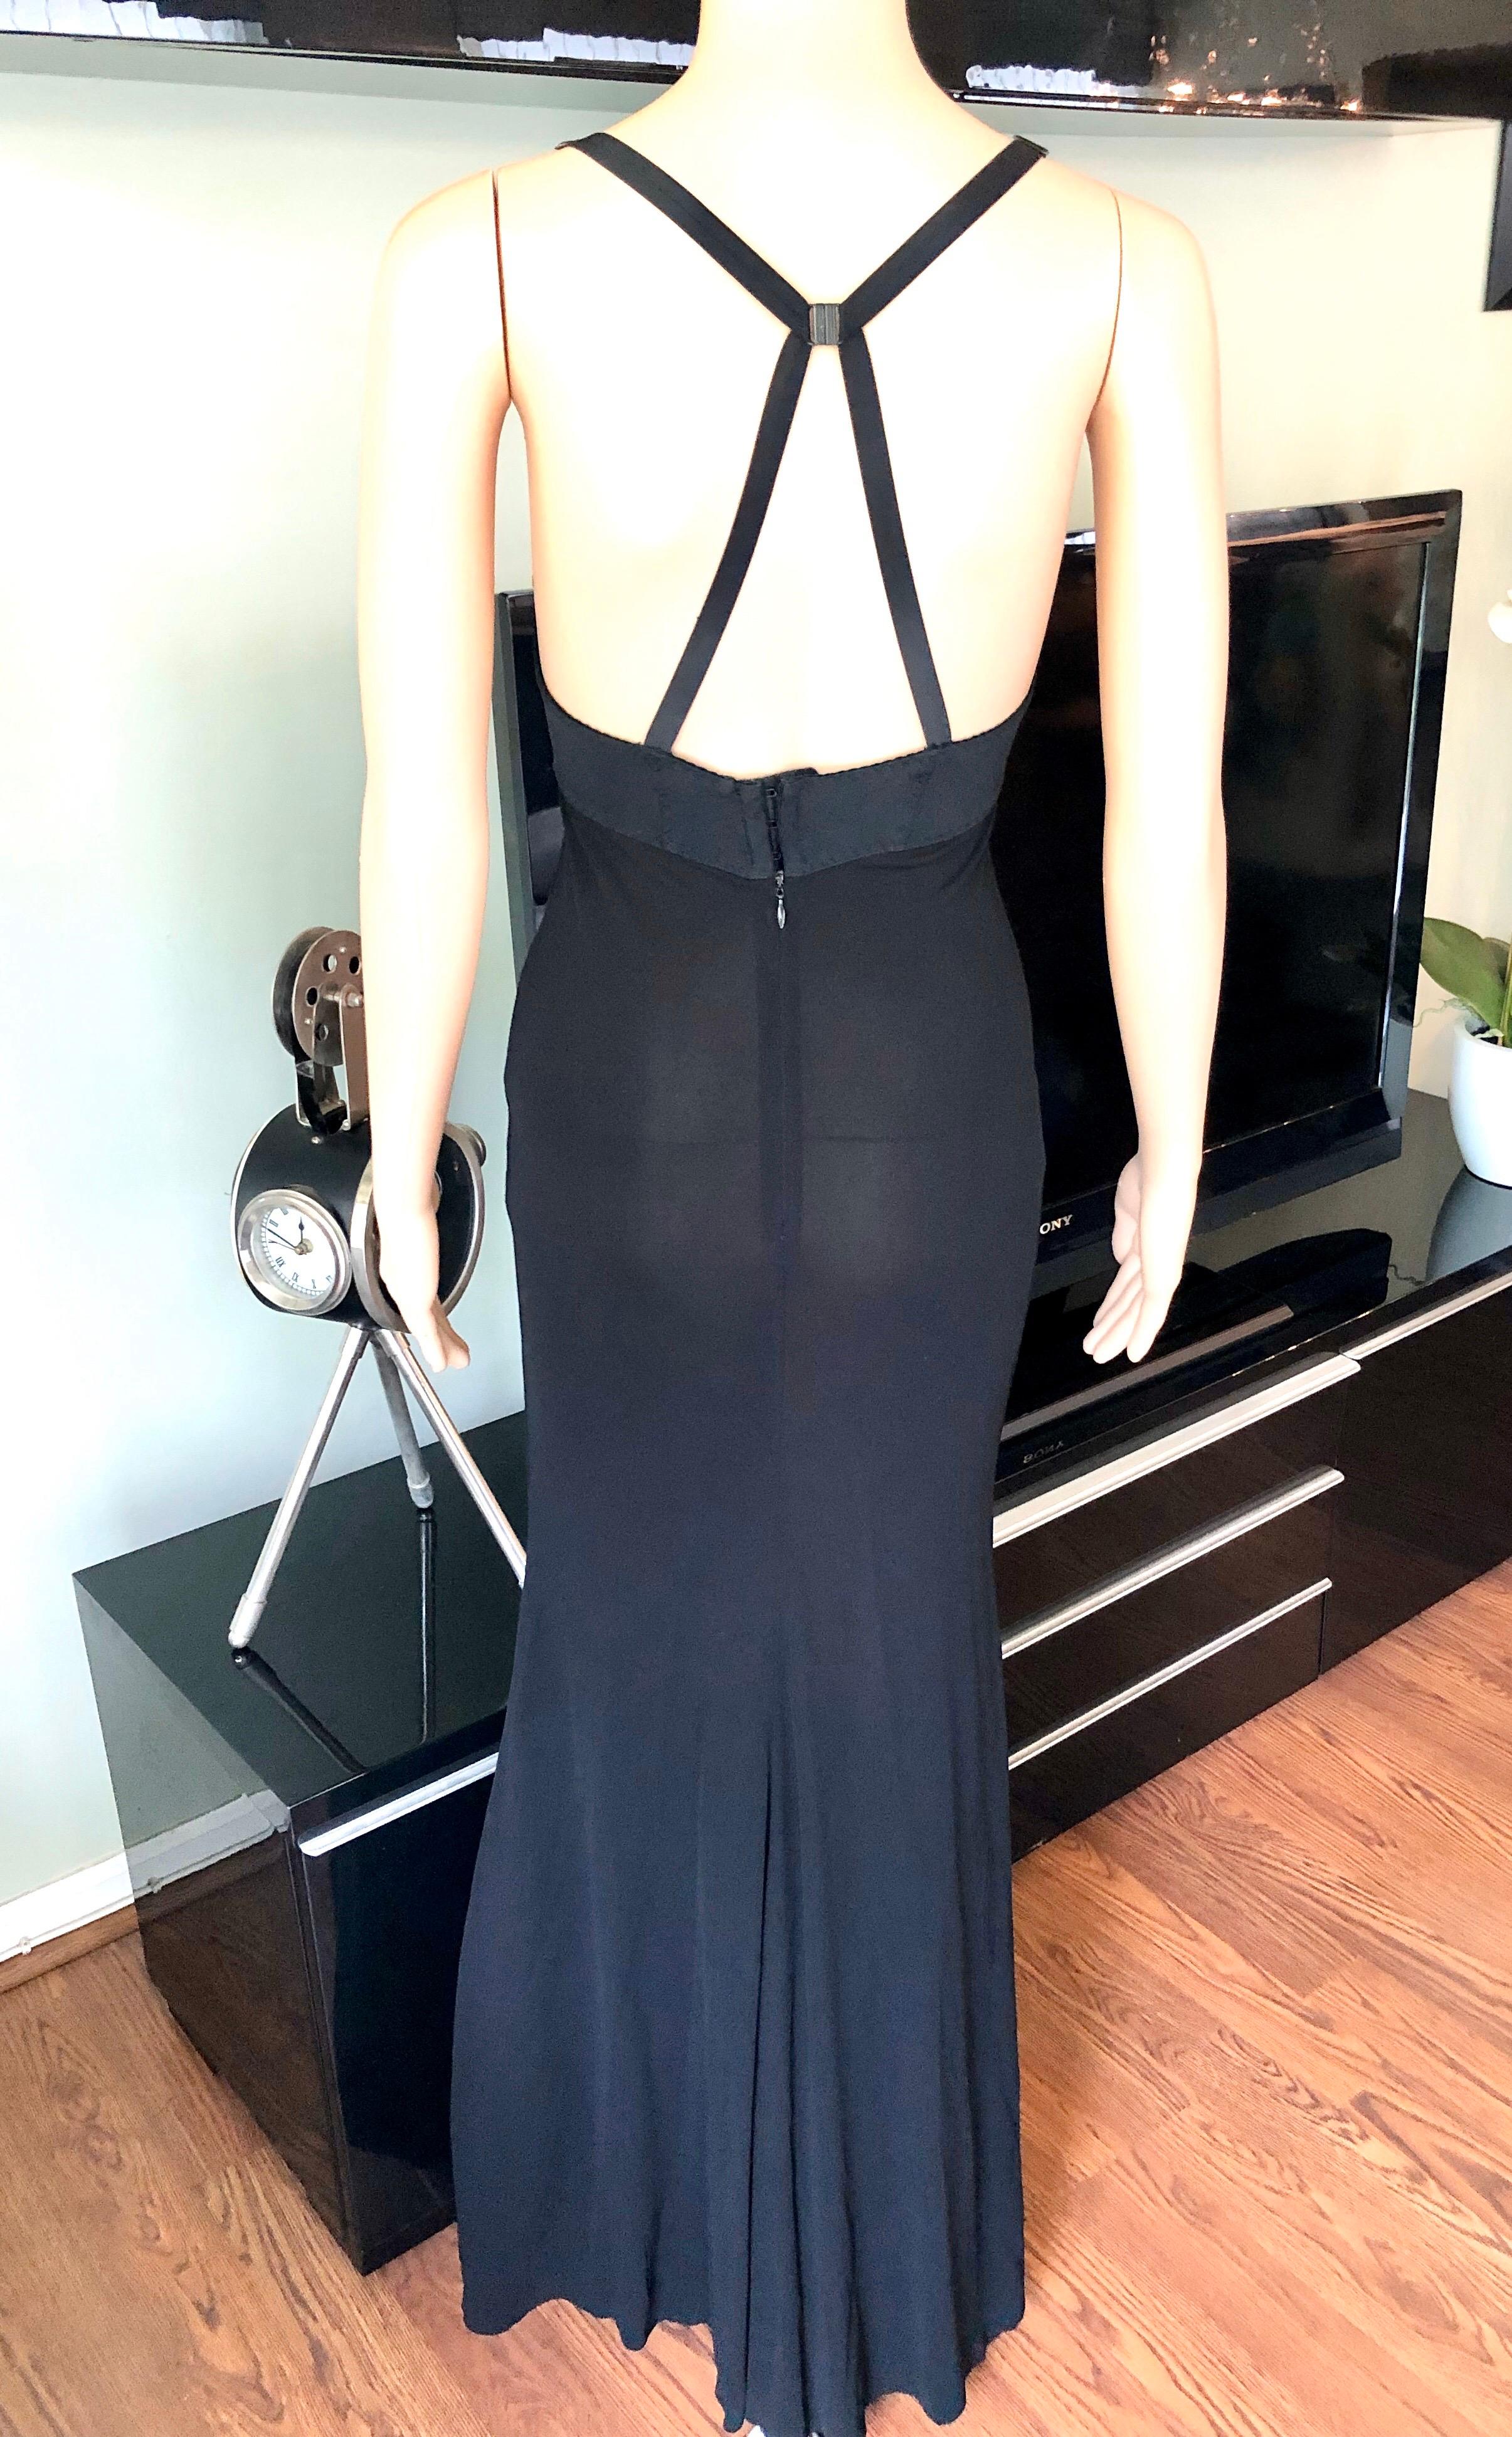 Jean Paul Gaultier Semi-Sheer Cutout Back Grommet Accented Bust Black Dress In Good Condition For Sale In Naples, FL